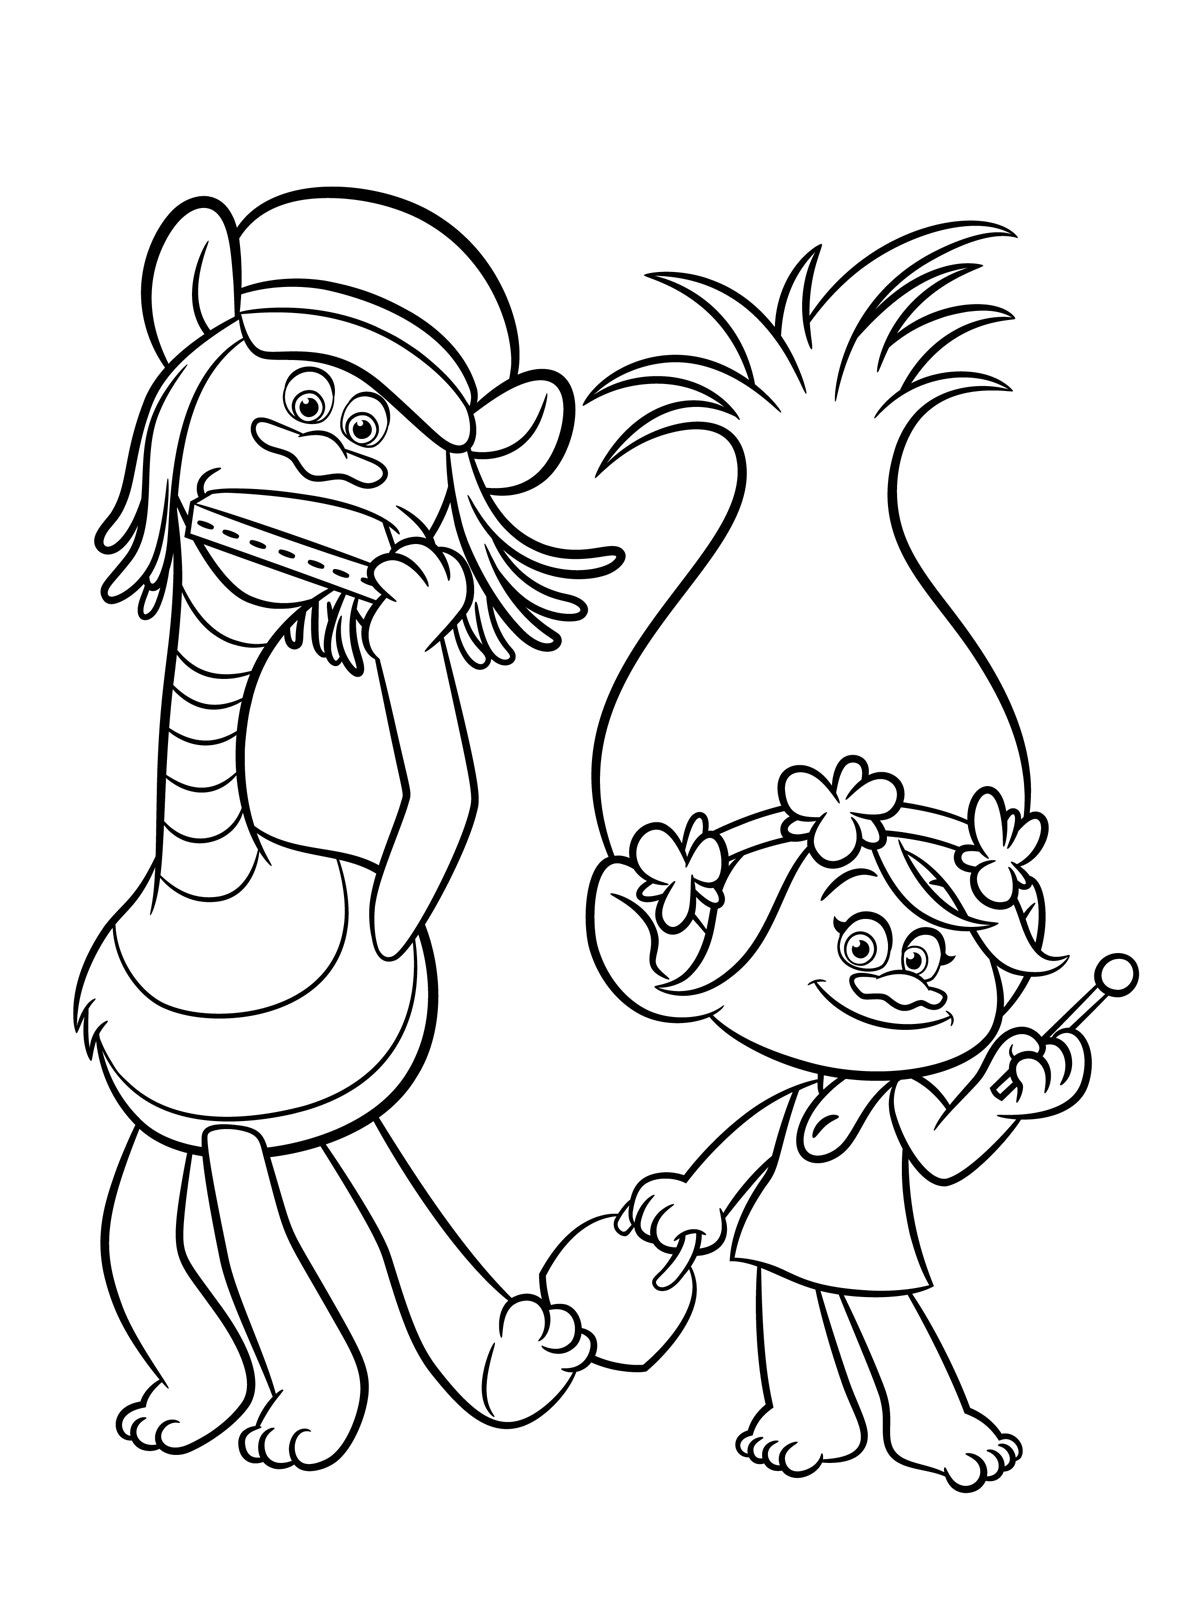 Kids Coloring Pages Disney
 Disney Coloring Pages Best Coloring Pages For Kids